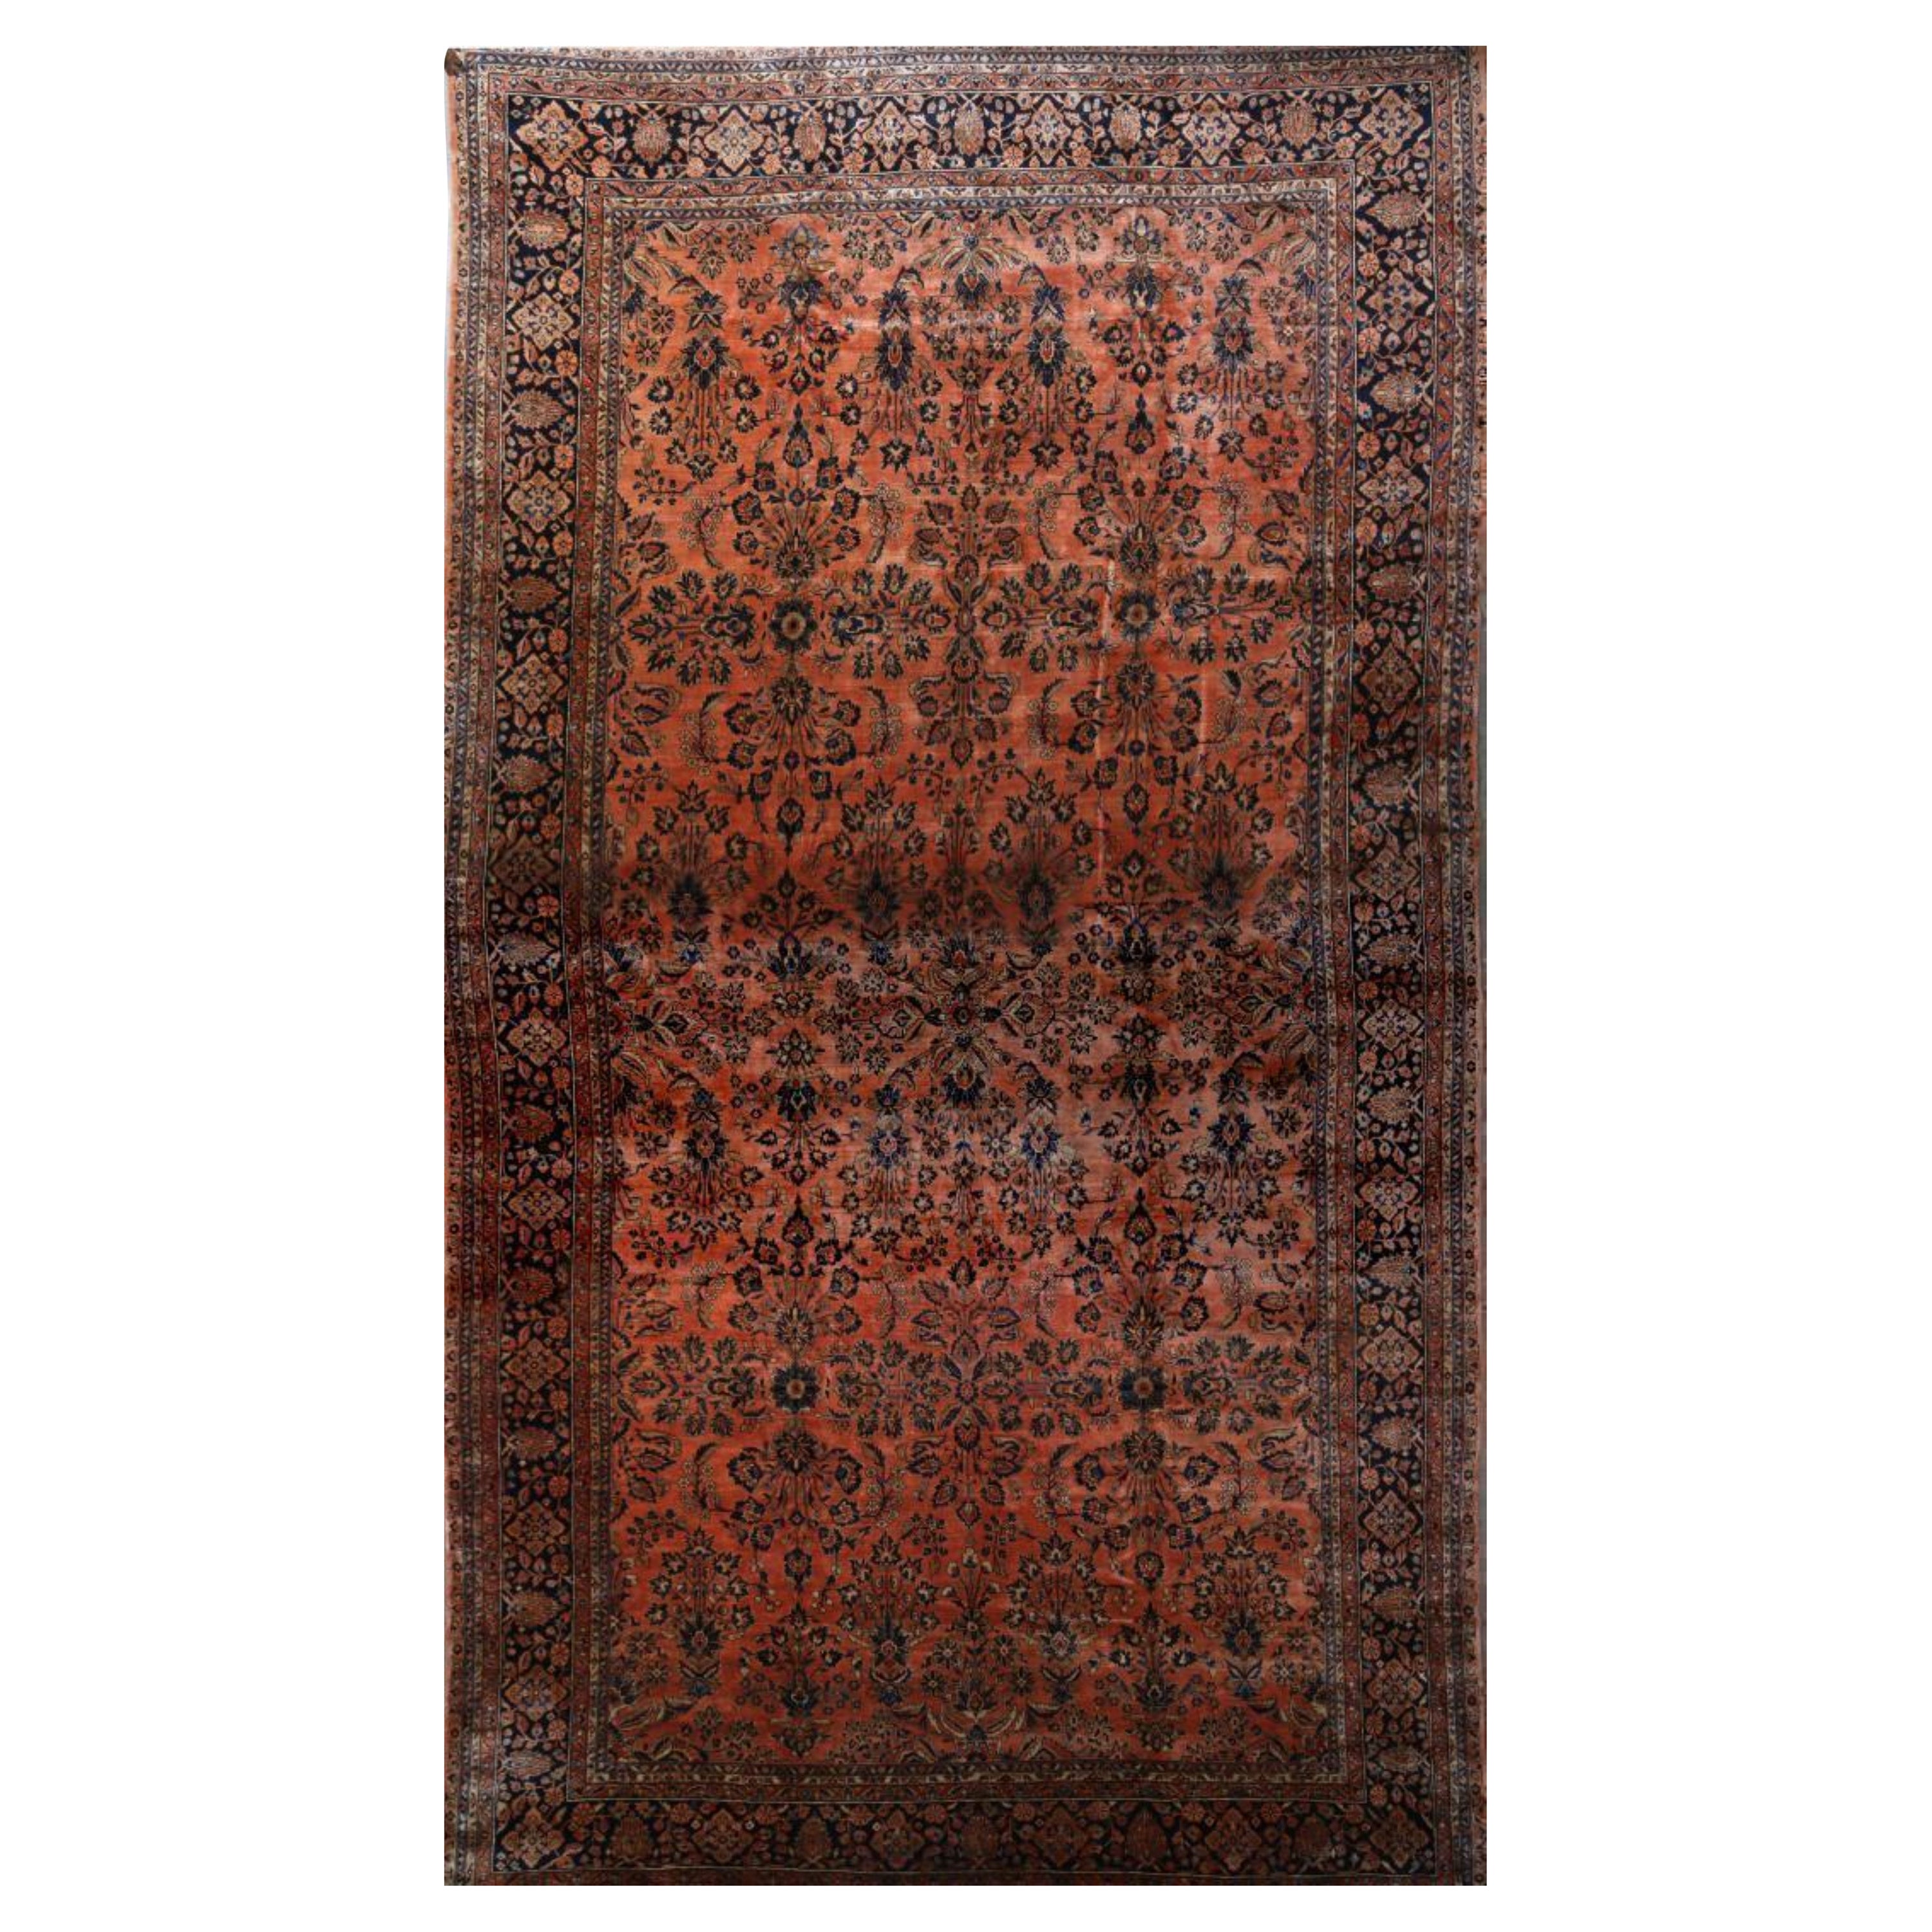 Hand-Knotted Antique Sarouk Persian Rug in Orange and Black Floral Pattern For Sale